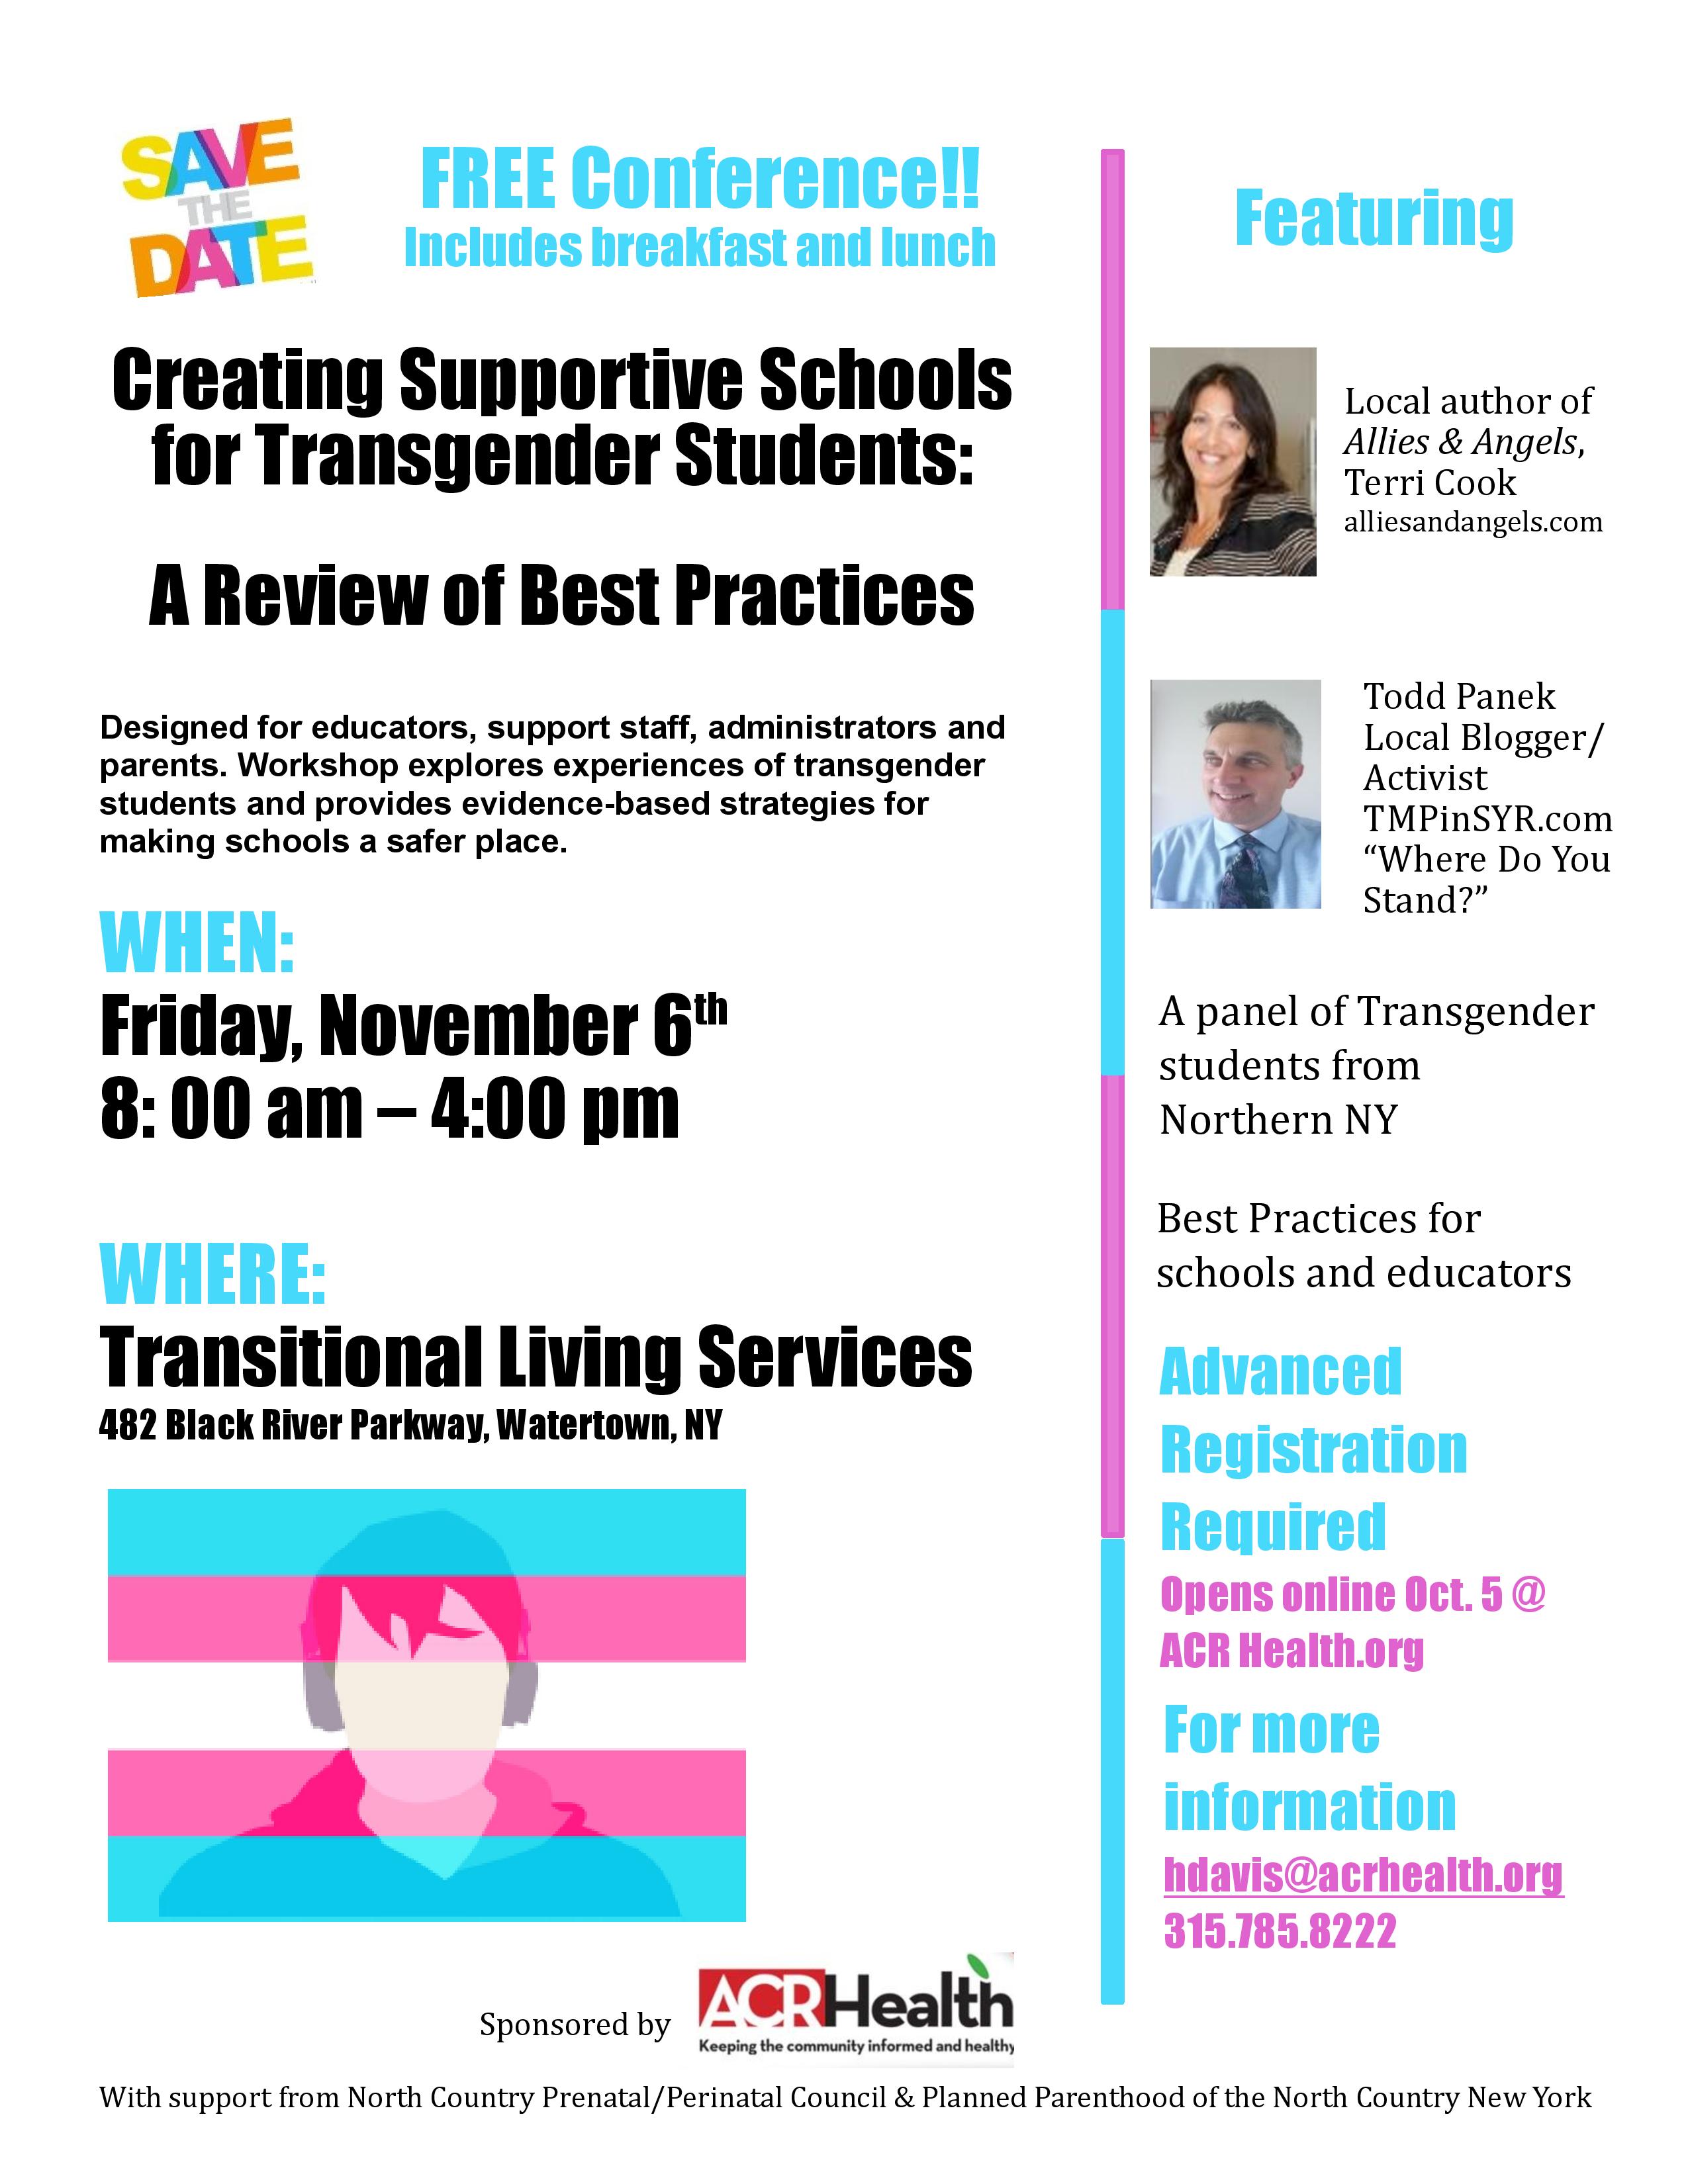 NNY Trans Conference Save the Date